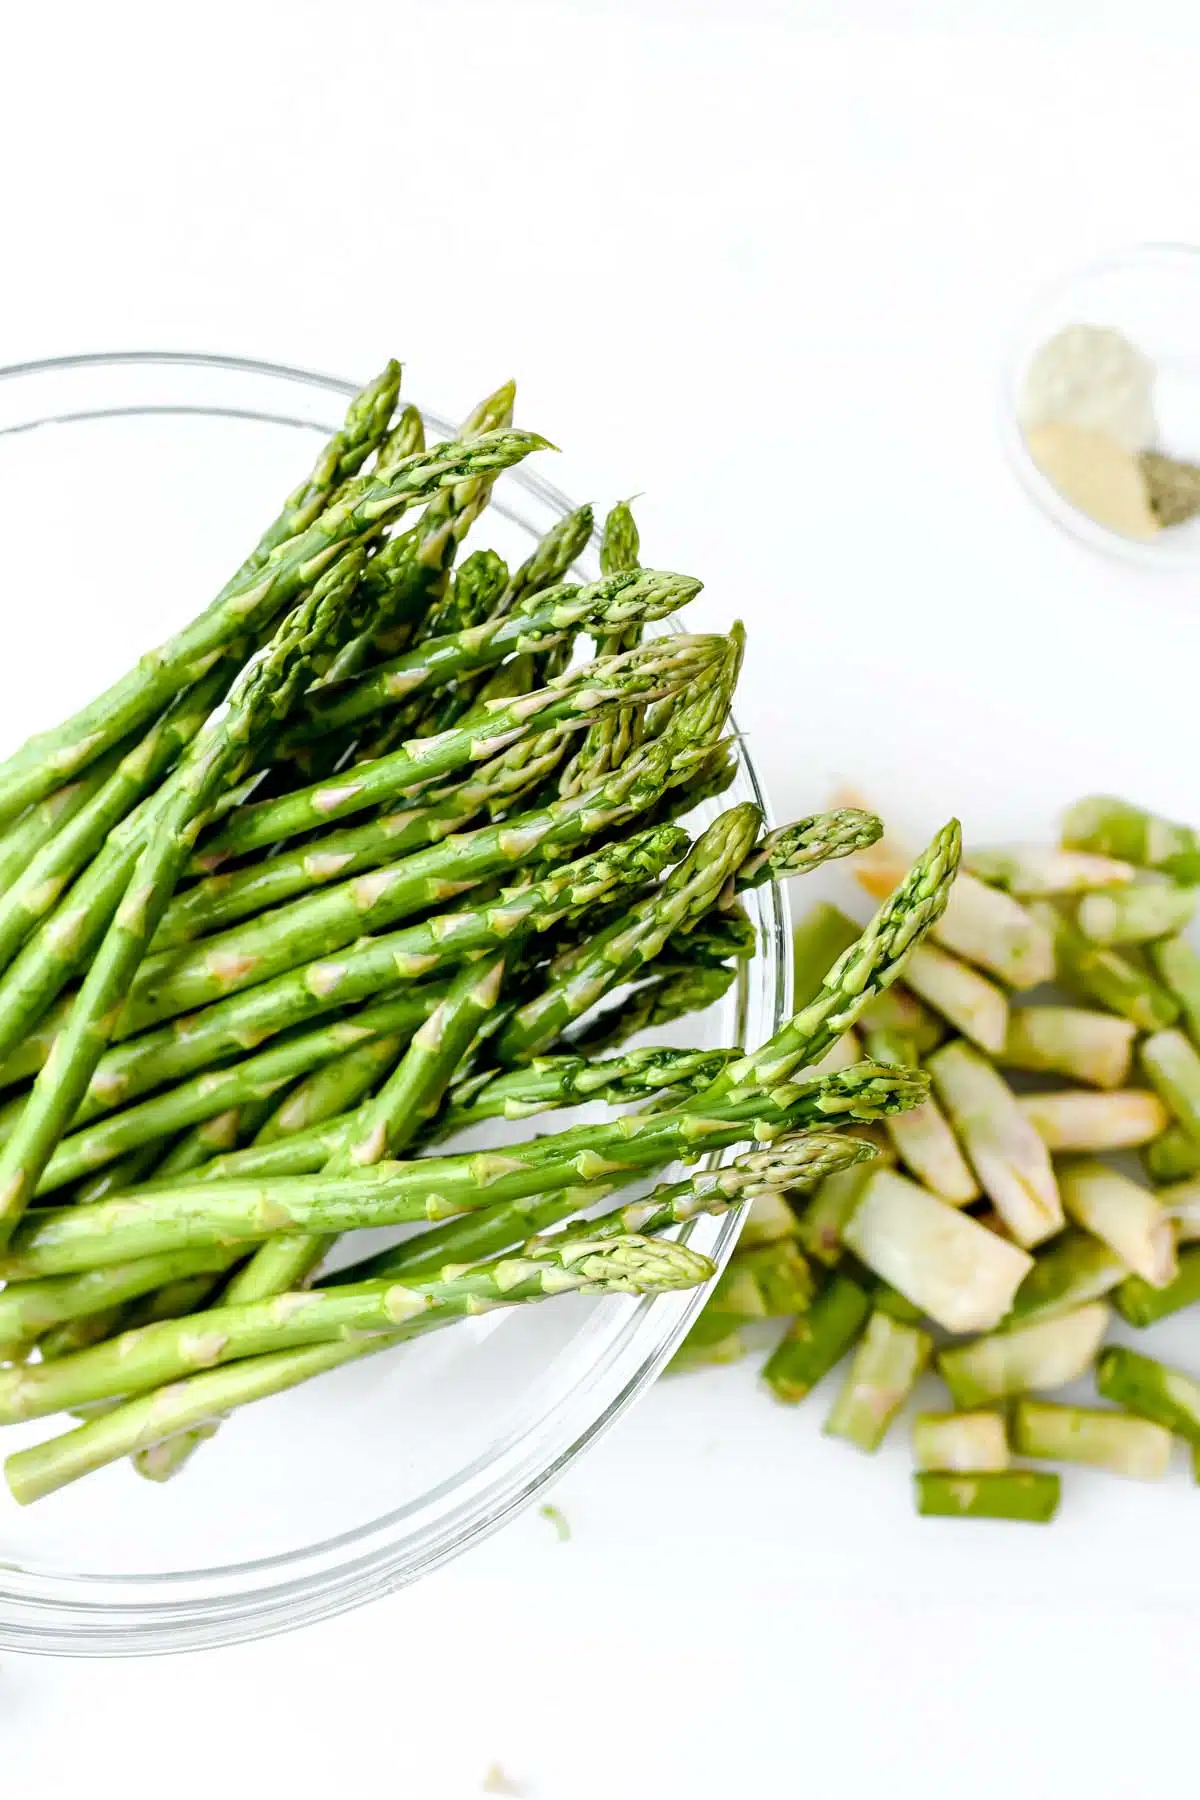 Asparagus with its tips cut off in a bowl.